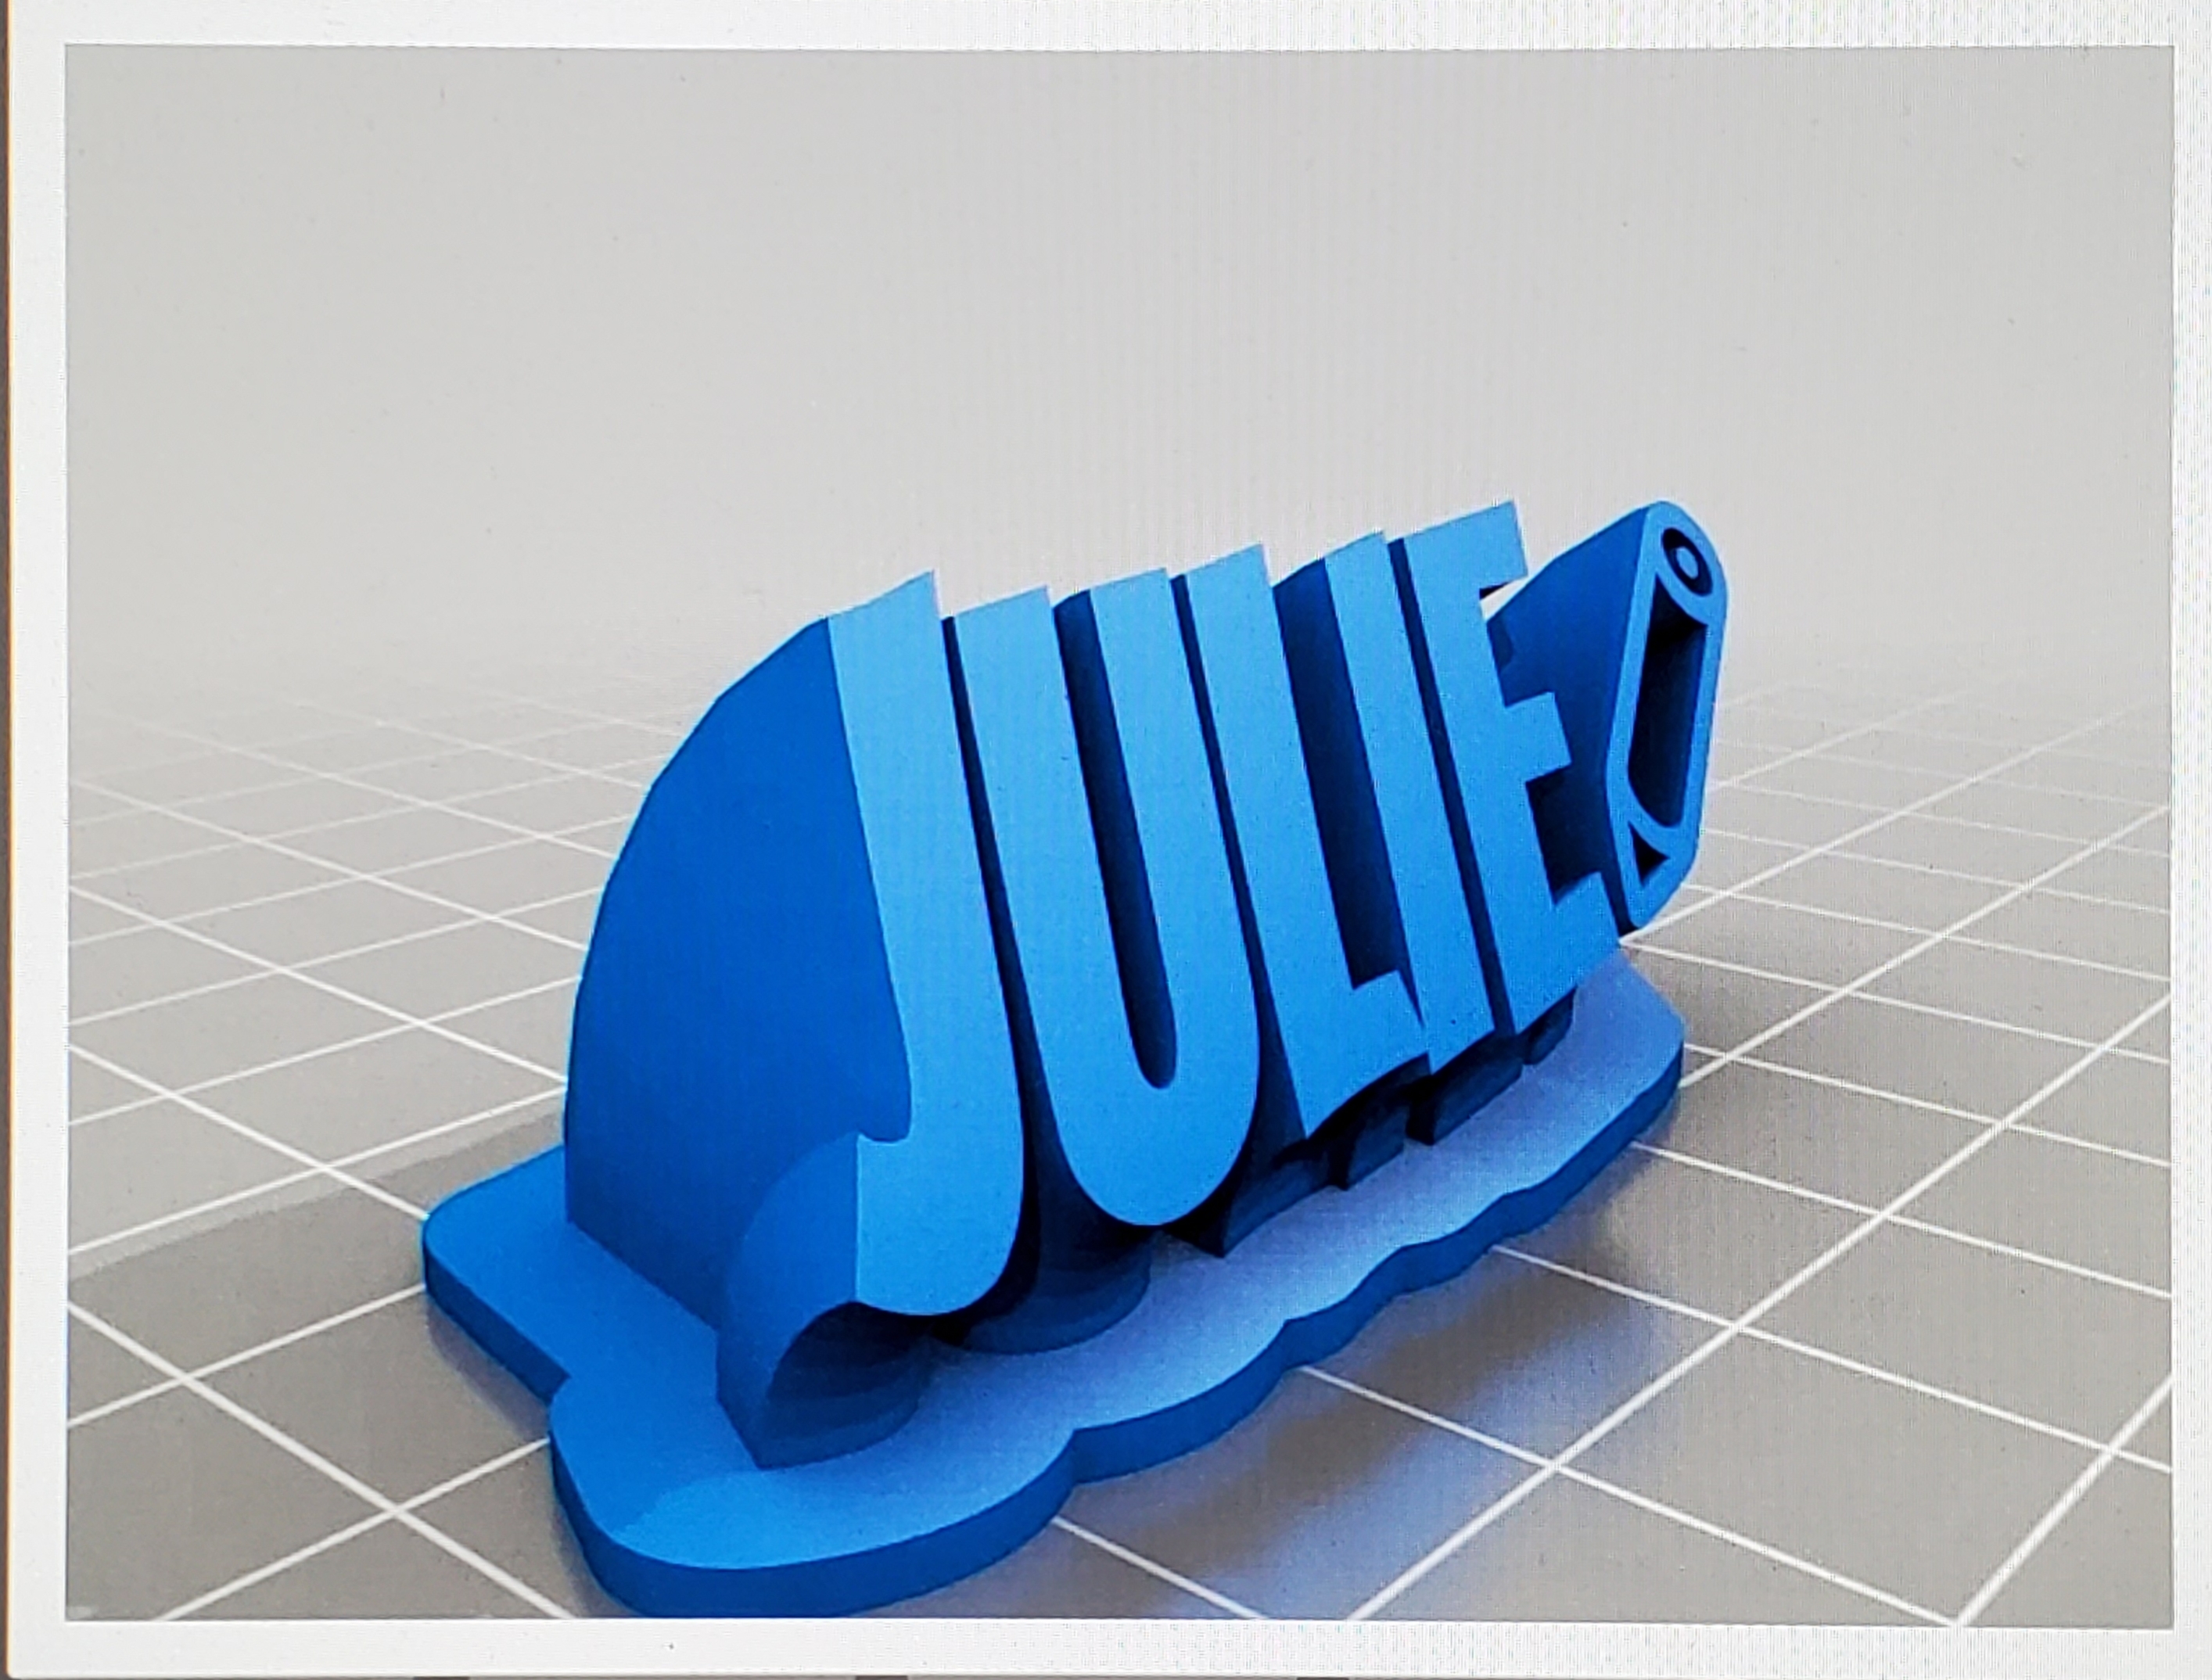 Julie 3D Print Name with pencil by nikkibarba17 via Thingiverse